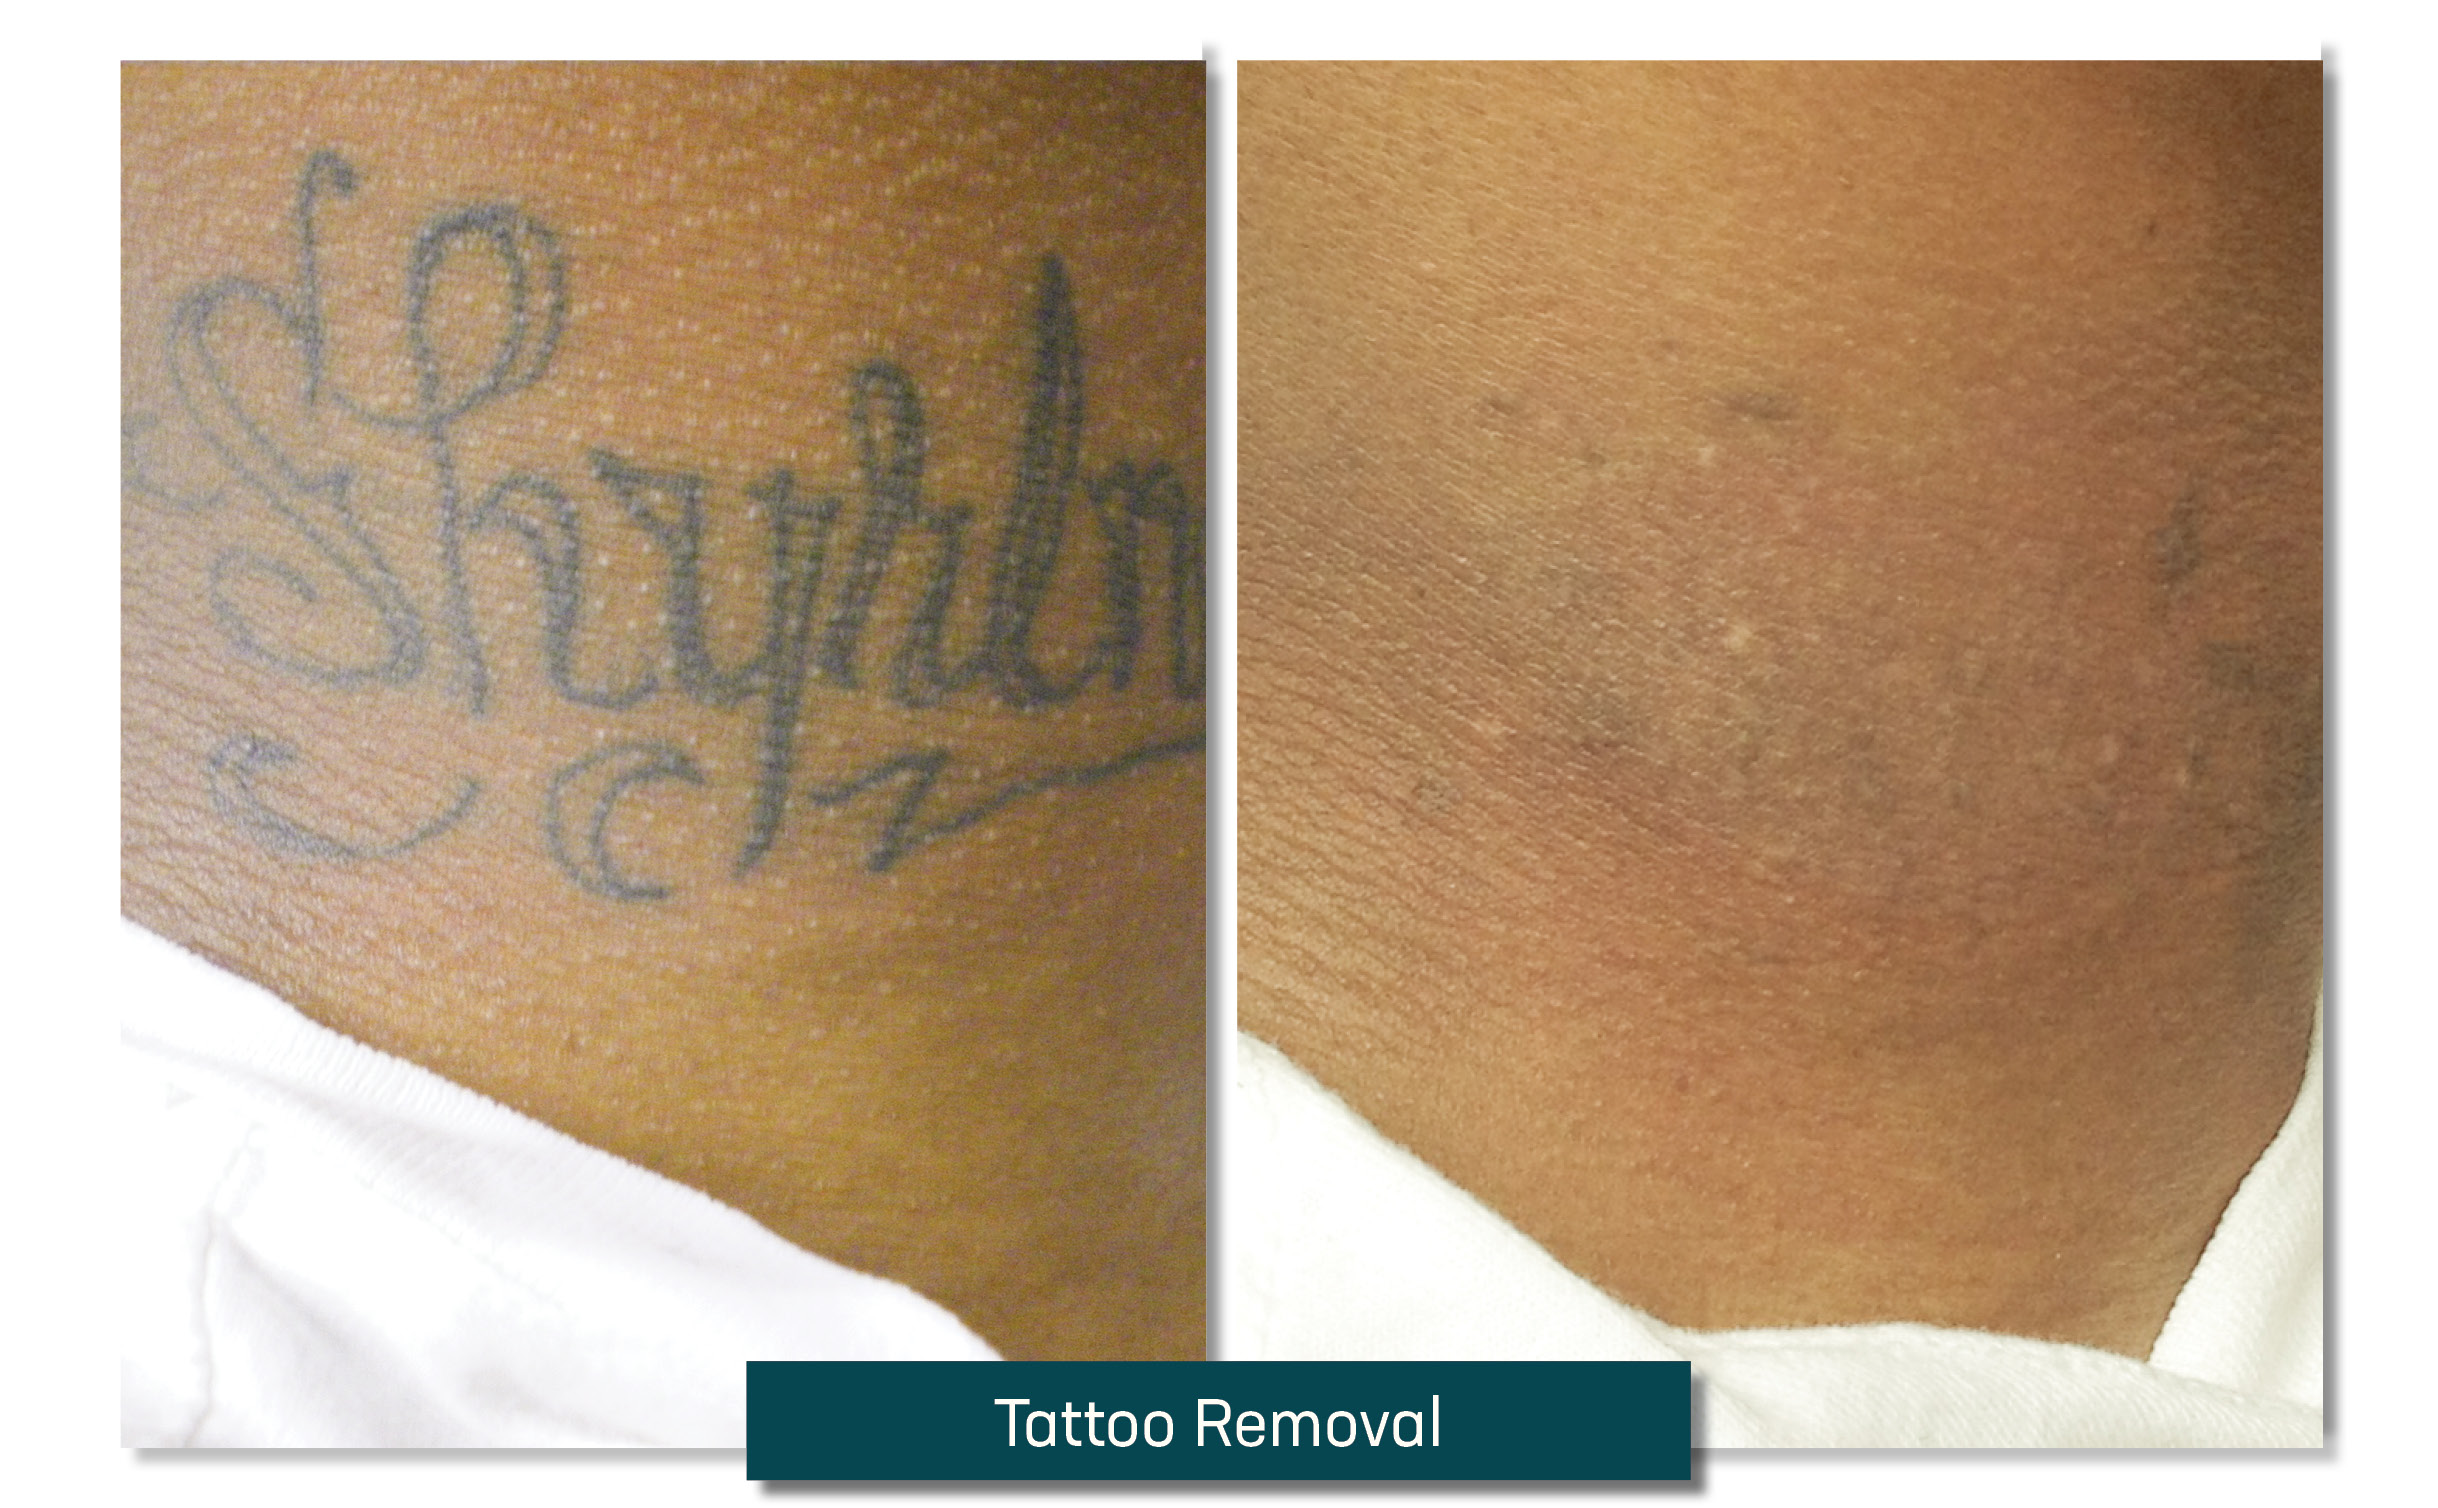 tatoo removal - before and after